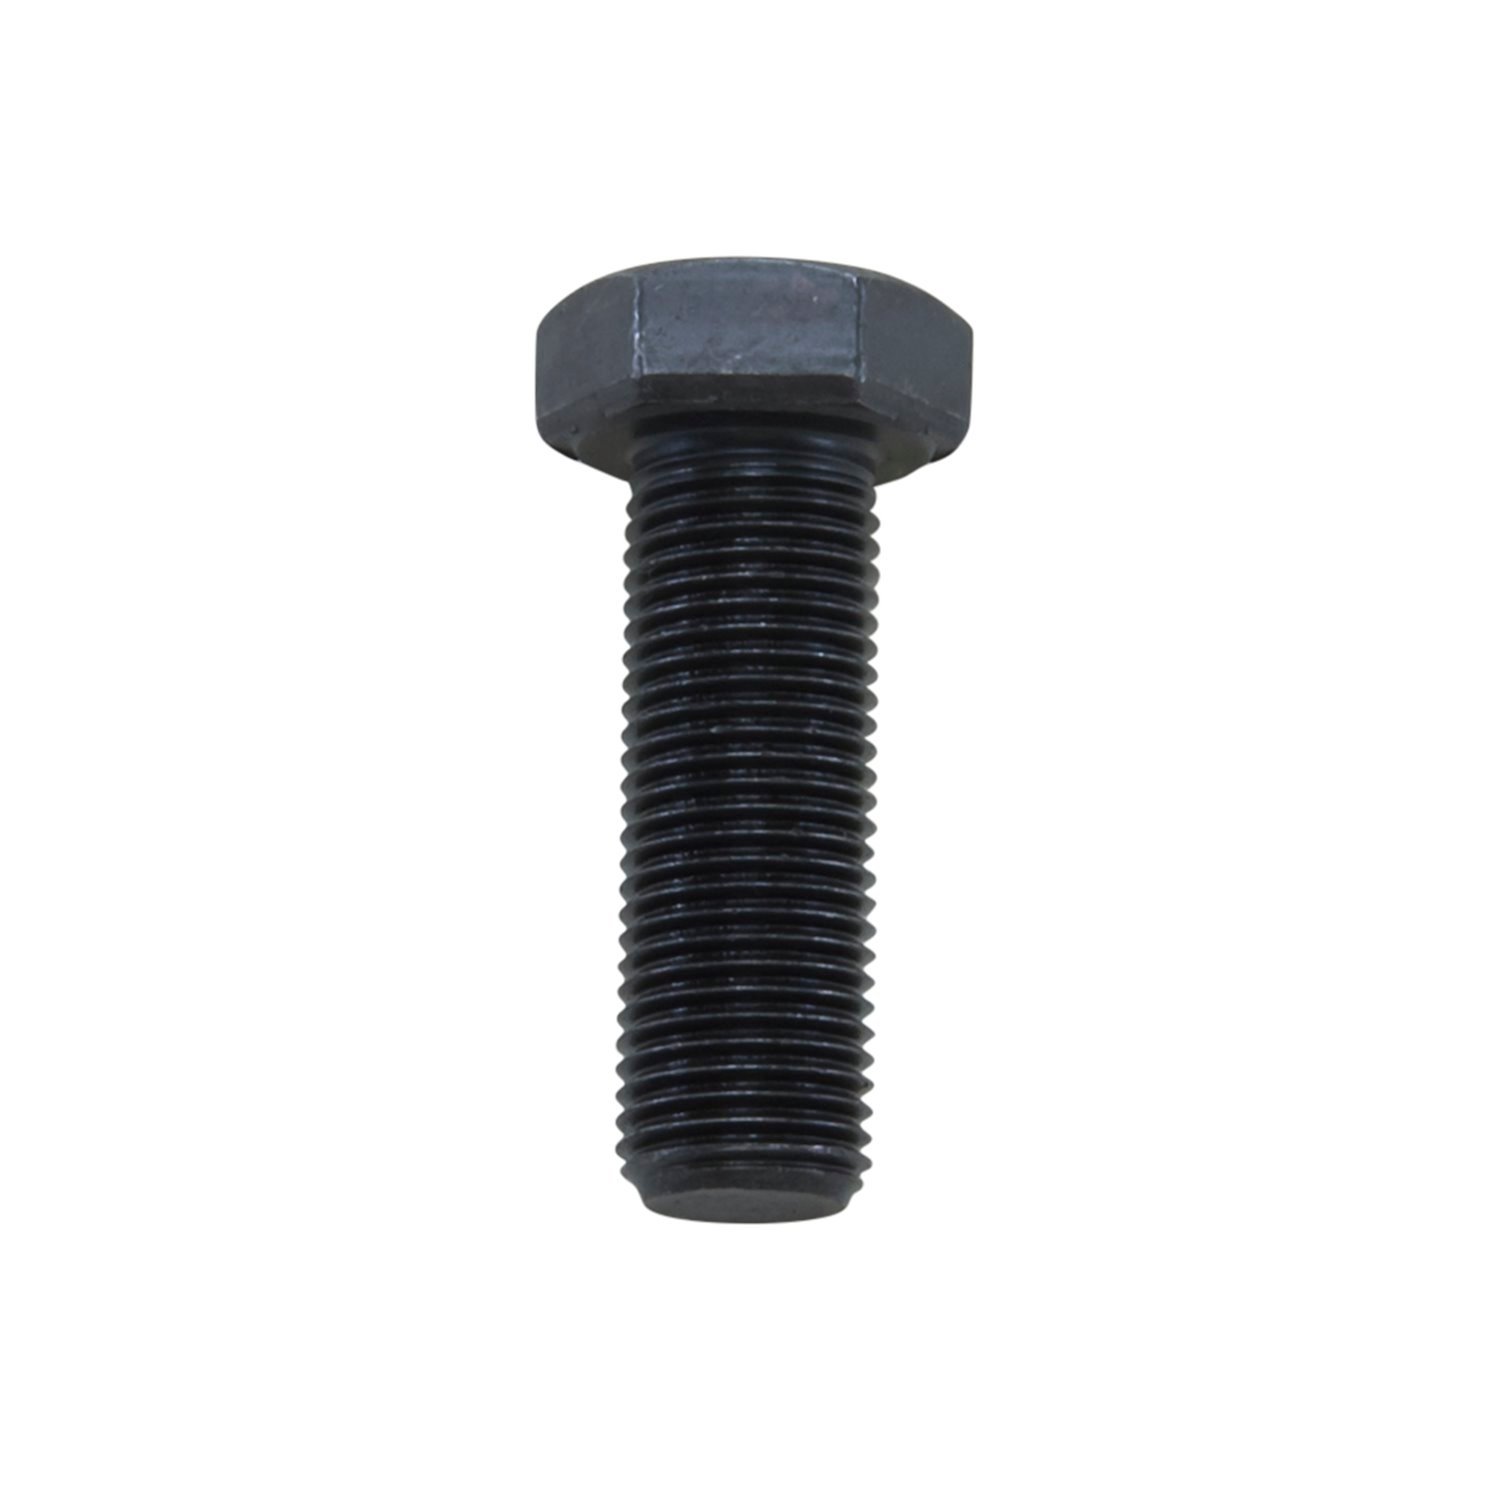 Model 35 & Other Screw-Inaxle Stud, 1/2 in.